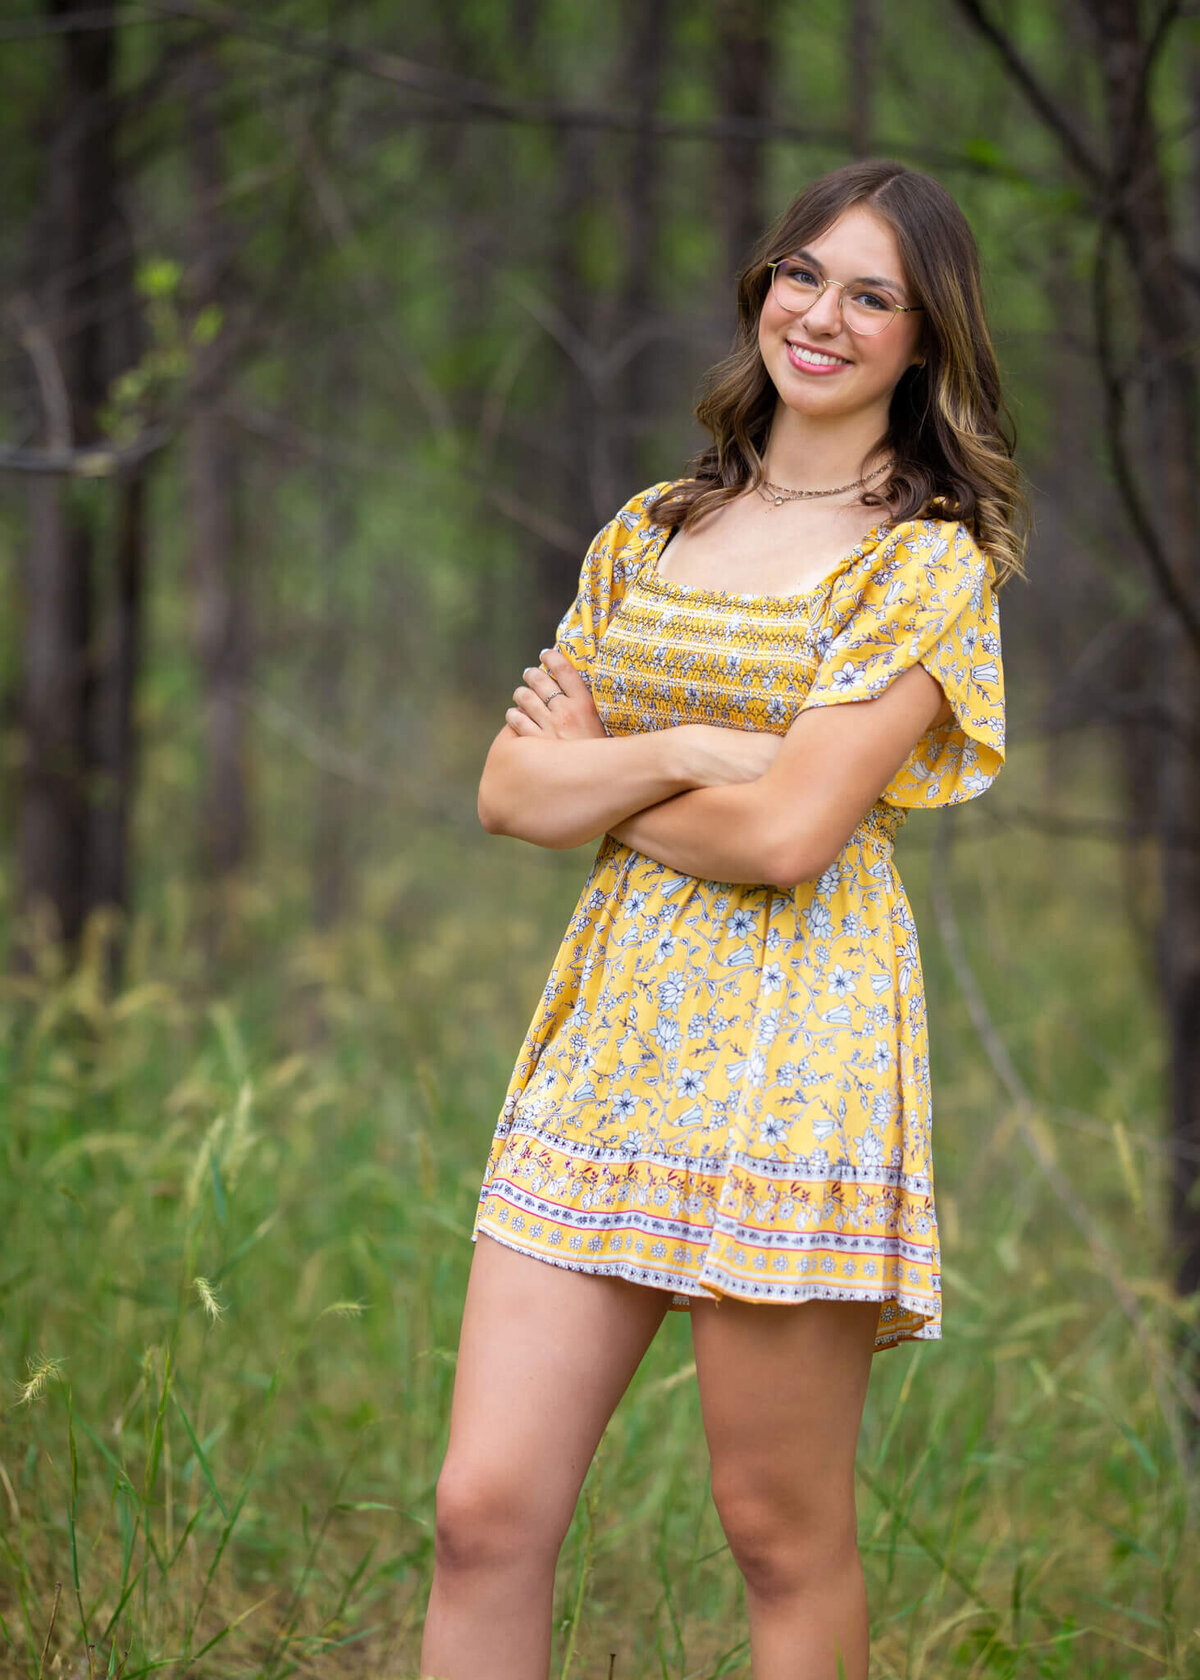 high school senior girl in a yellow sun dress standing in a  forest